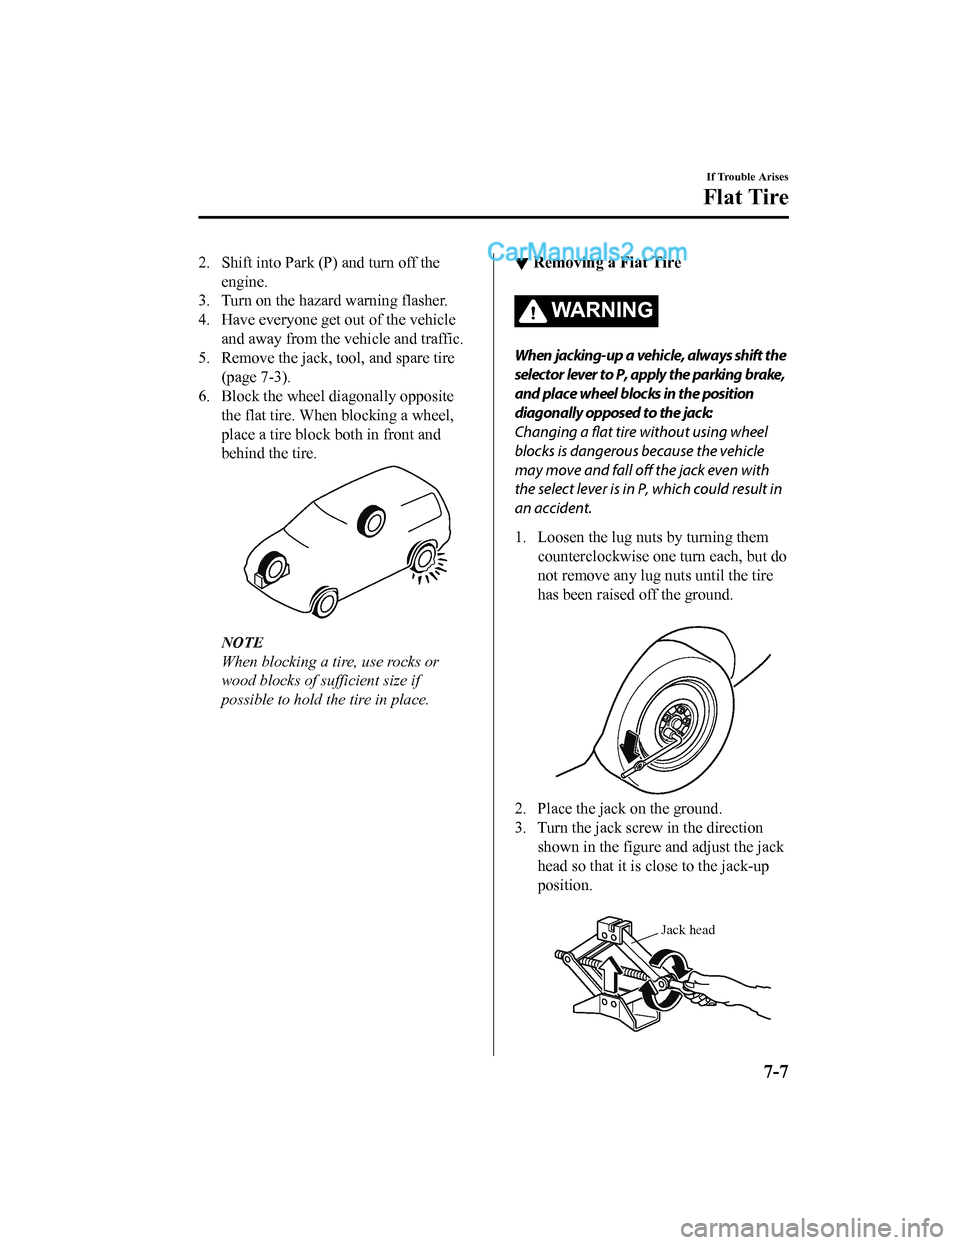 MAZDA MODEL CX-5 2018  Owners Manual (in English) 2. Shift into Park (P) and turn off theengine.
3. Turn on the hazard warning flasher.
4. Have everyone get out of the vehicle and away from the vehicle and traffic.
5. Remove the jack, tool, and spare